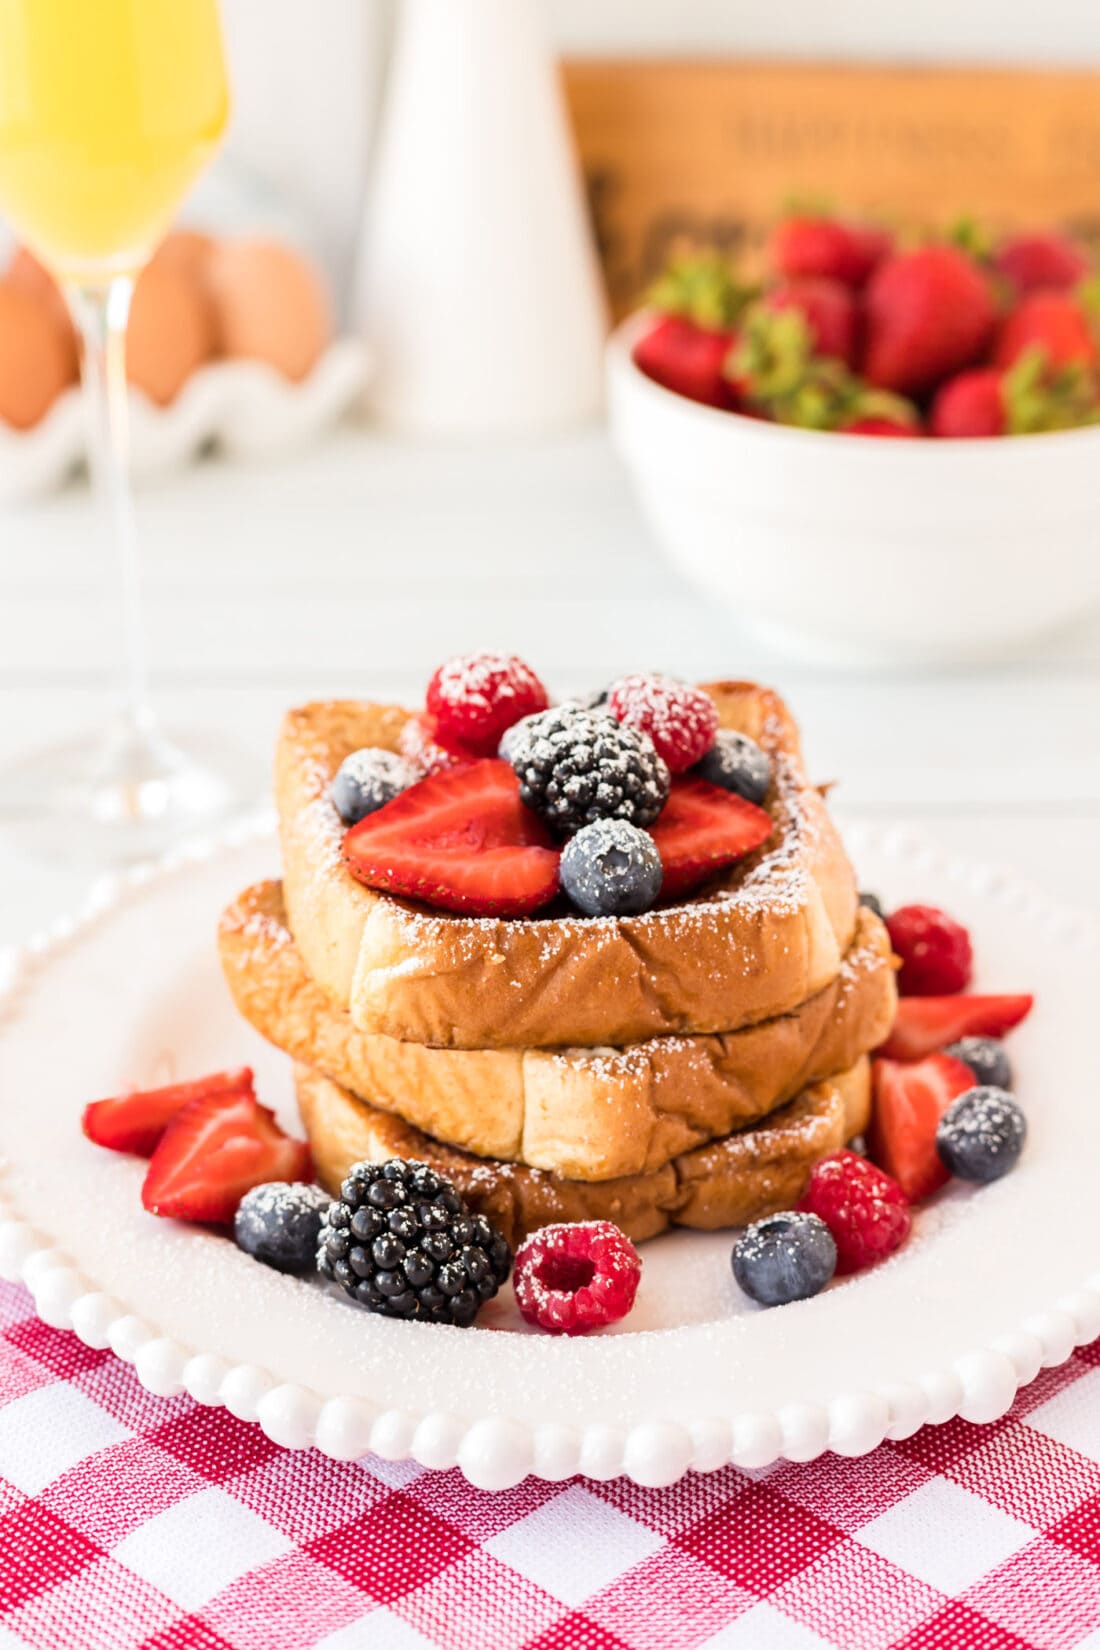 French Toast with fruit topping